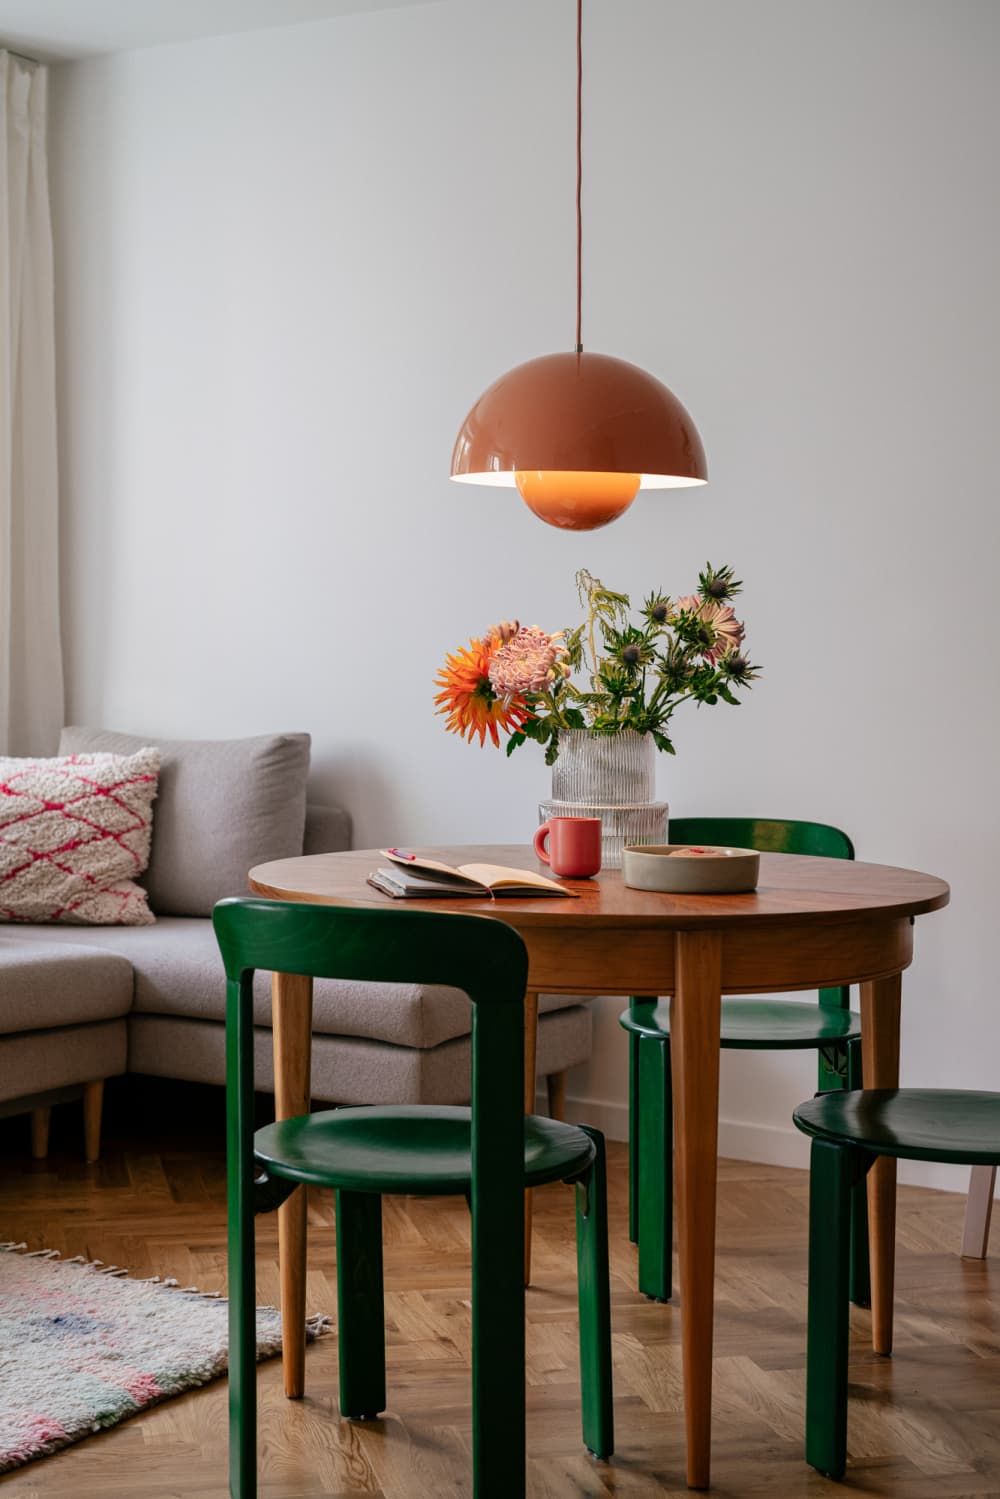 Dining Table Chairs: Stylish and Comfortable Seating for Dining Spaces